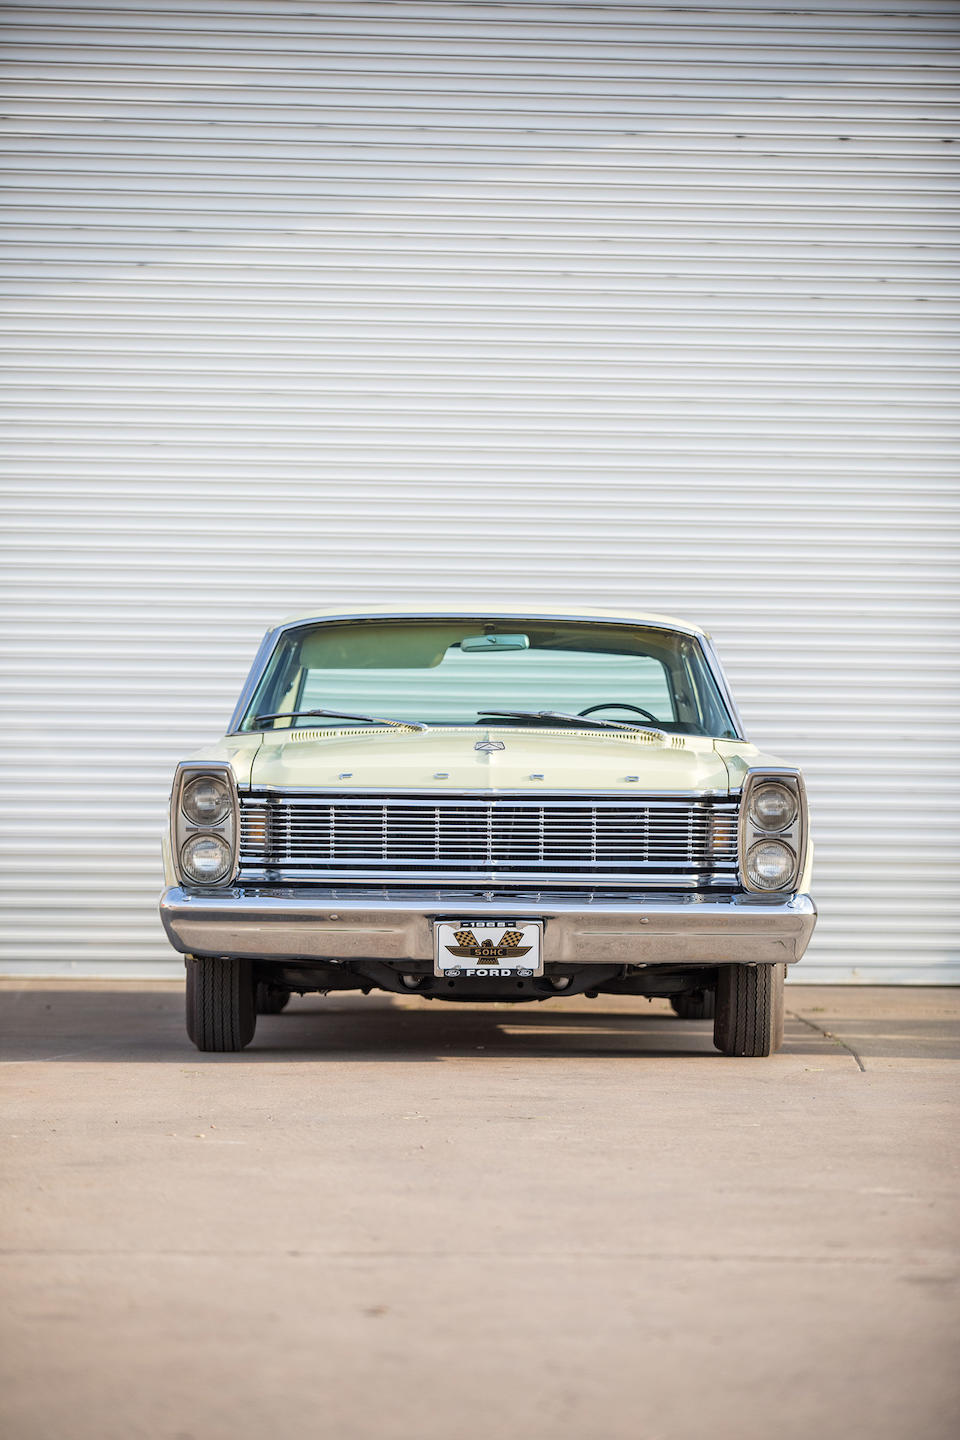 <b>1965 Ford Galaxie 500 M-Code "Cammer" 2-Door Hardtop</b><br />Chassis no. 5F66M100016